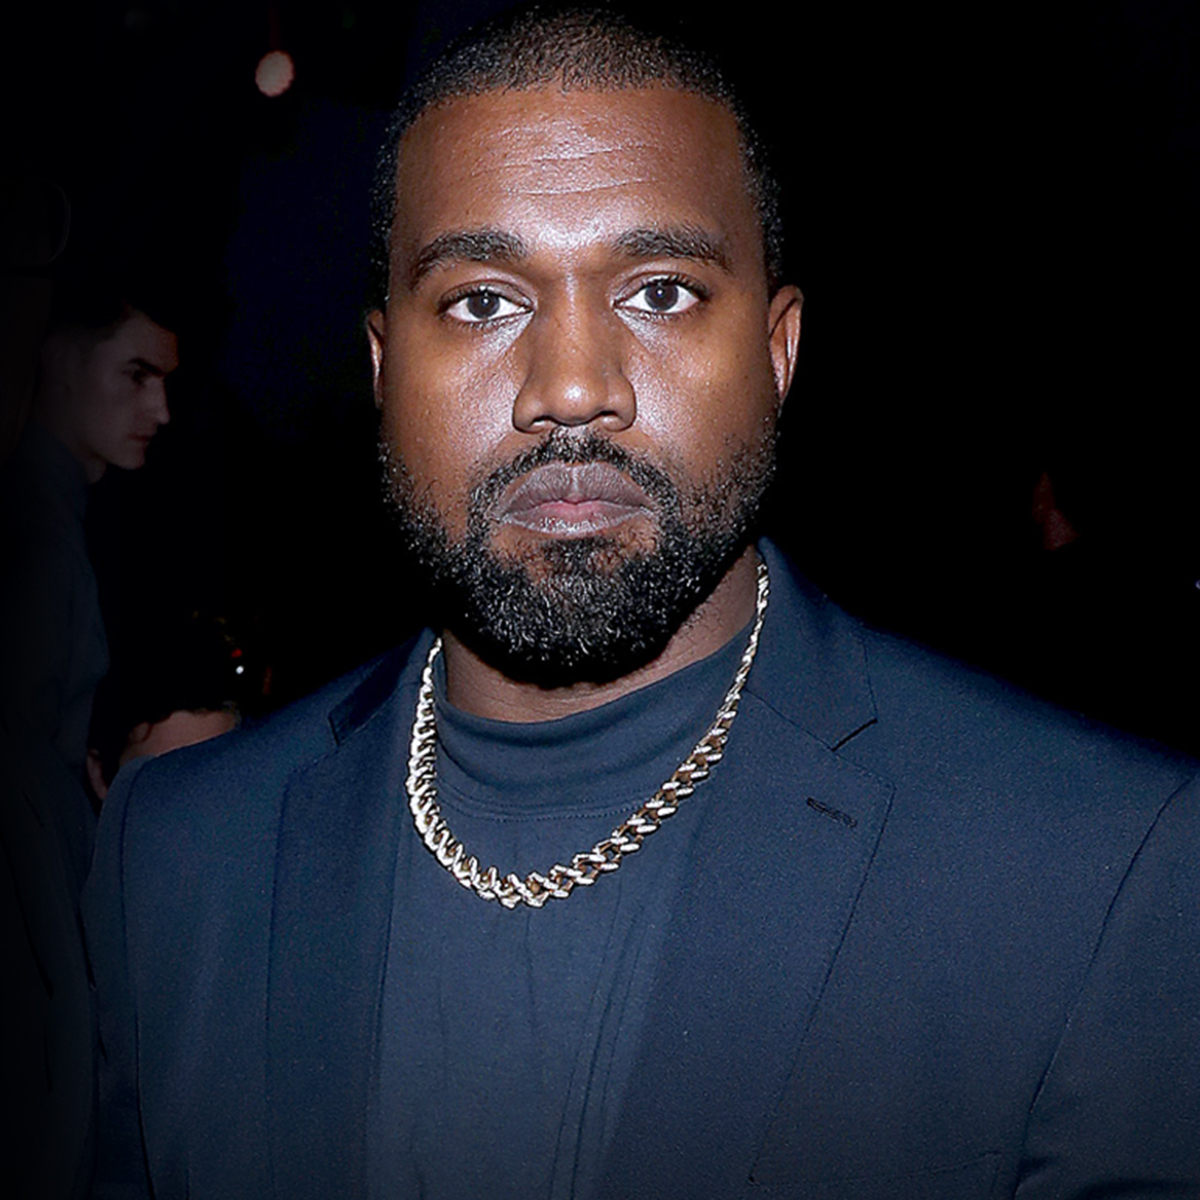 https://akns-images.eonline.com/eol_images/Entire_Site/202224/rs_1200x1200-220304160700-1200-kanye-west-GettyImages-1186122969.jpg?fit=around%7C1080:1080&output-quality=90&crop=1080:1080;center,top